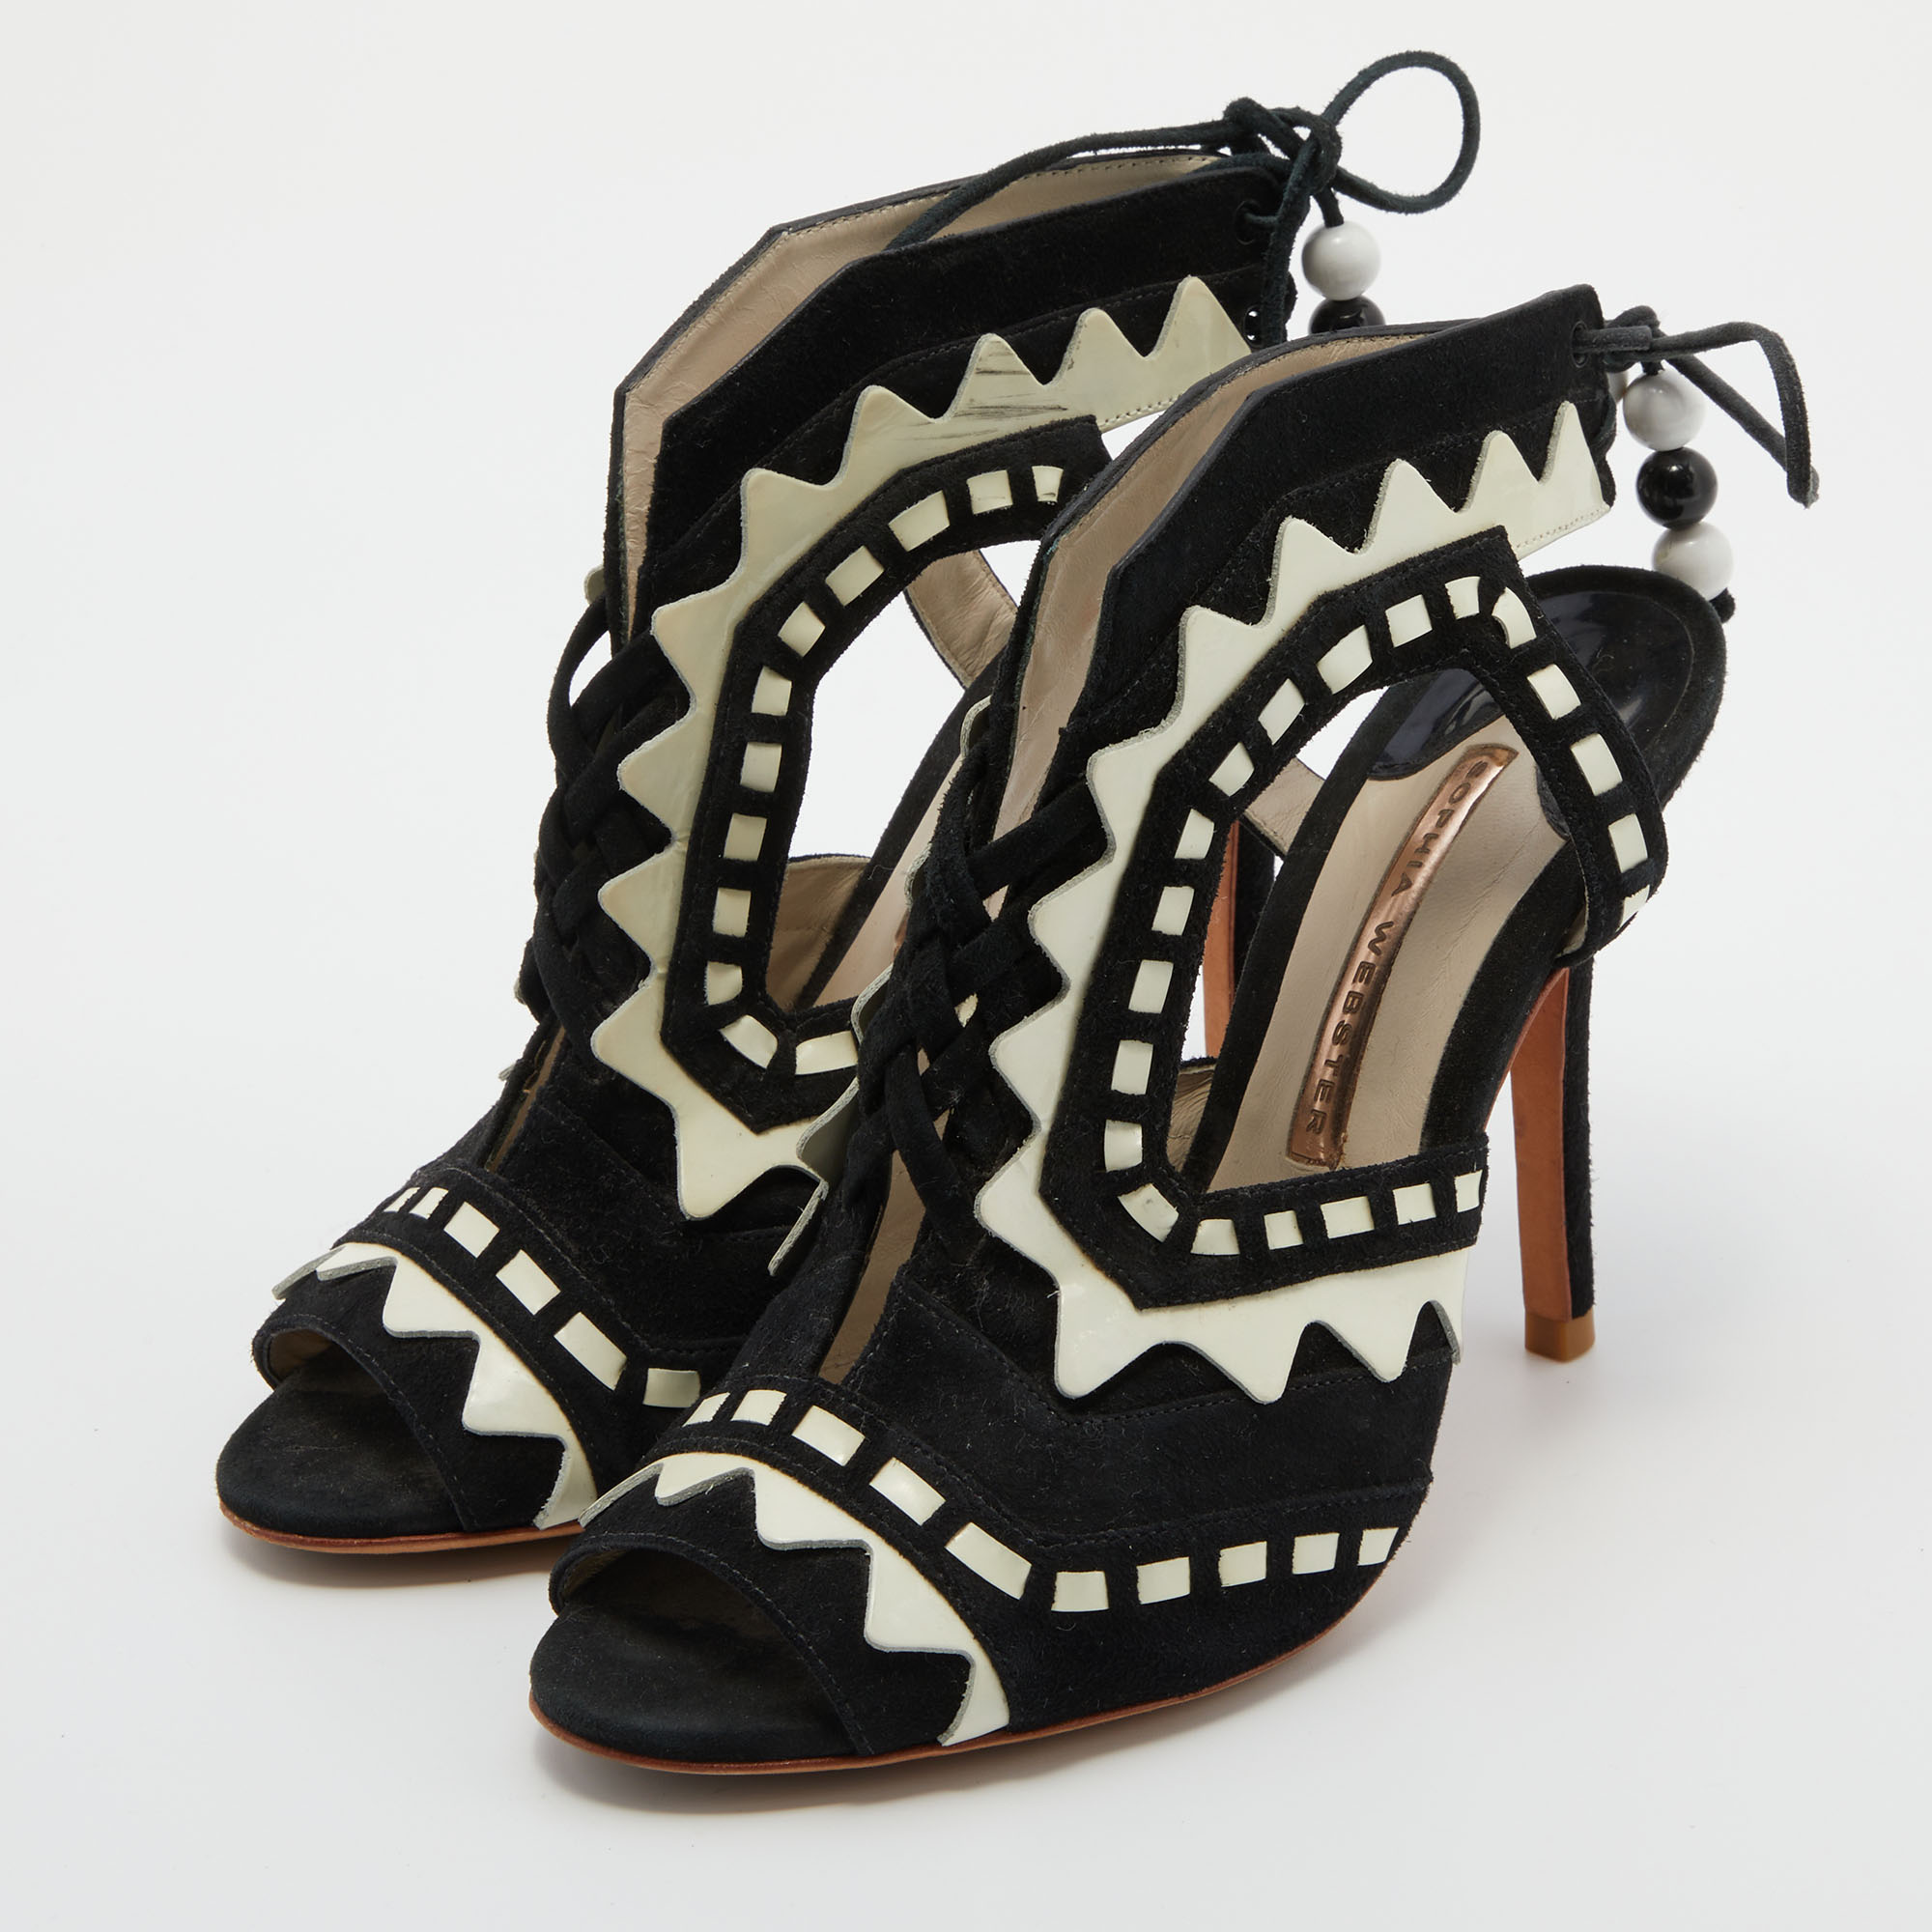 

Sophia Webster Black/White Suede and Patent Leather Riko Cut Out Ankle Sandals Size